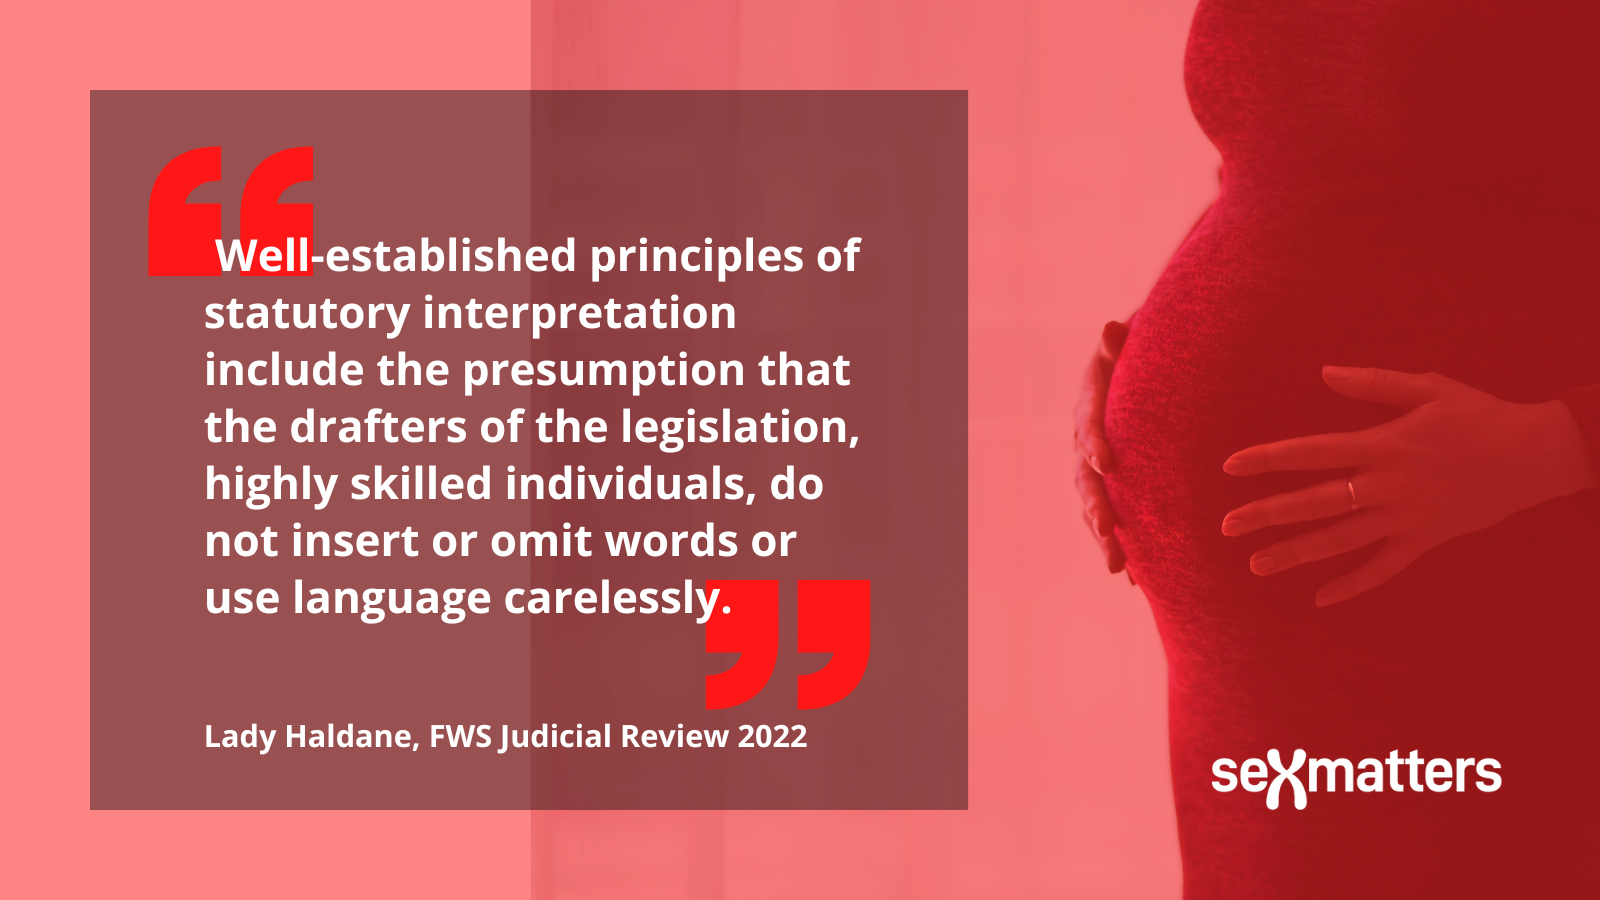 Well-established principles of statutory interpretation include the presumption that the drafters of the legislation, highly skilled individuals, do not insert or omit words or use language carelessly.